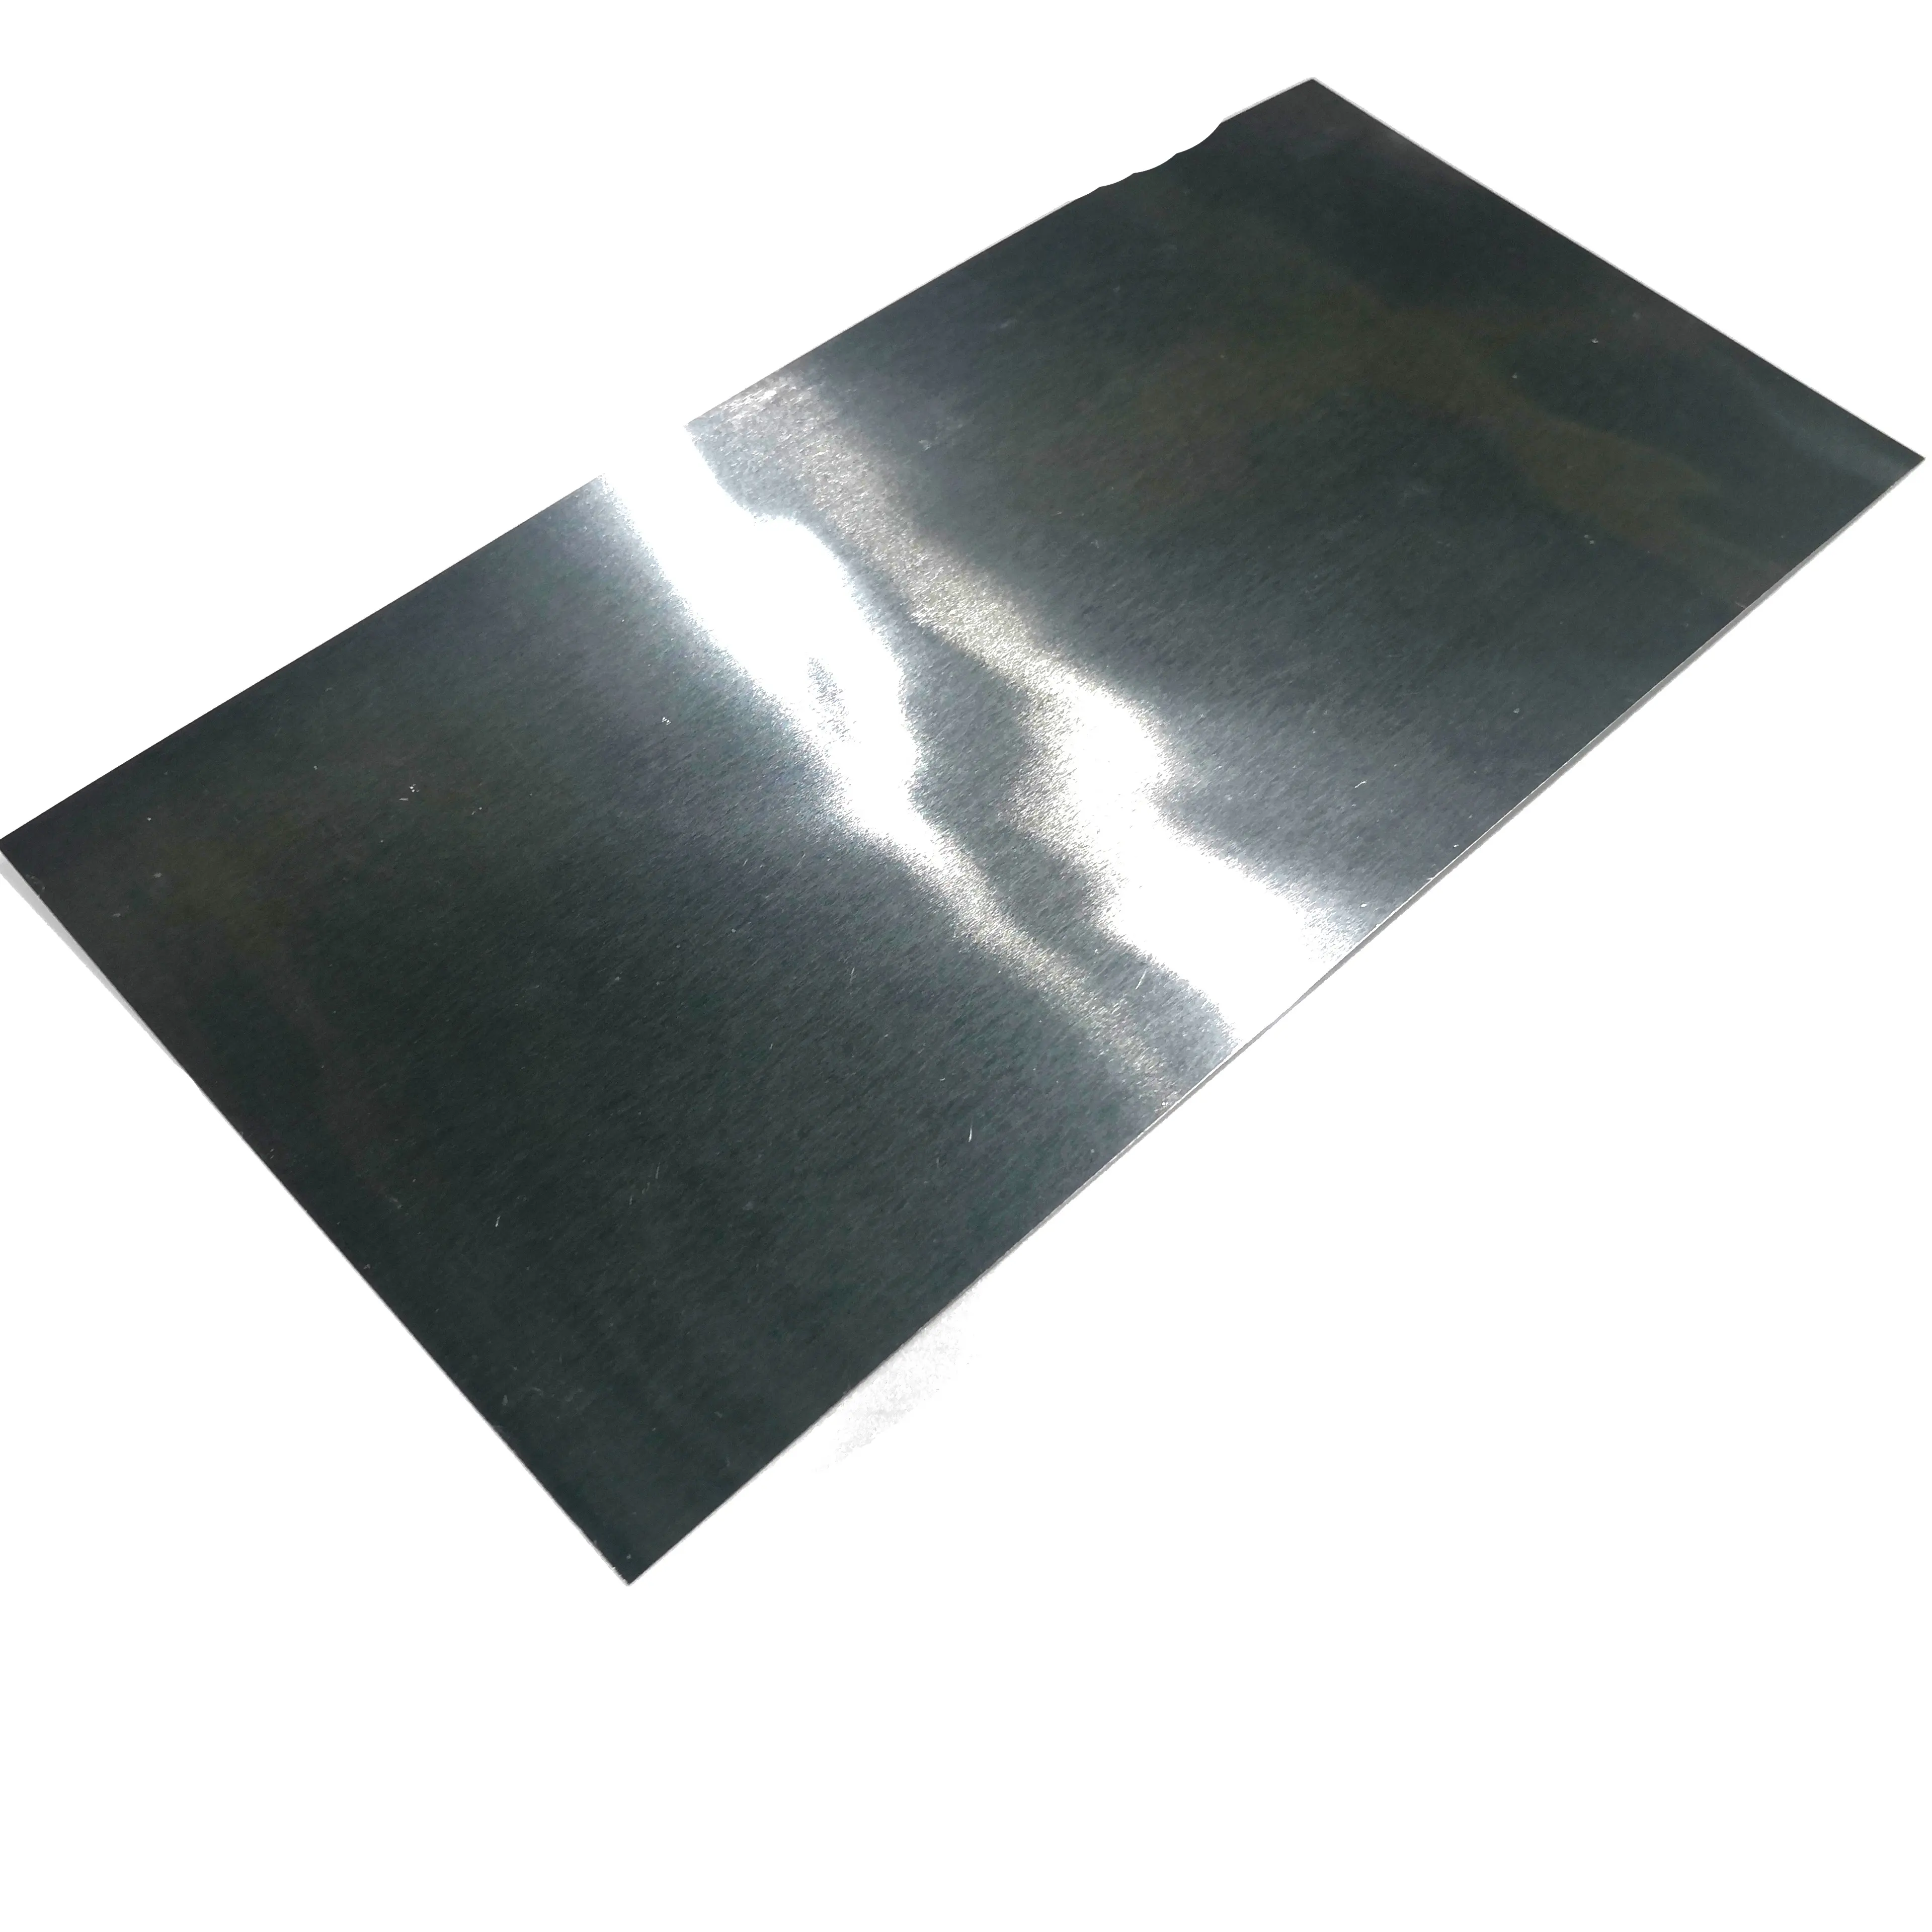 purity 99.95% wolfram foil  CT collinmator tungsten sheet for medical equipment